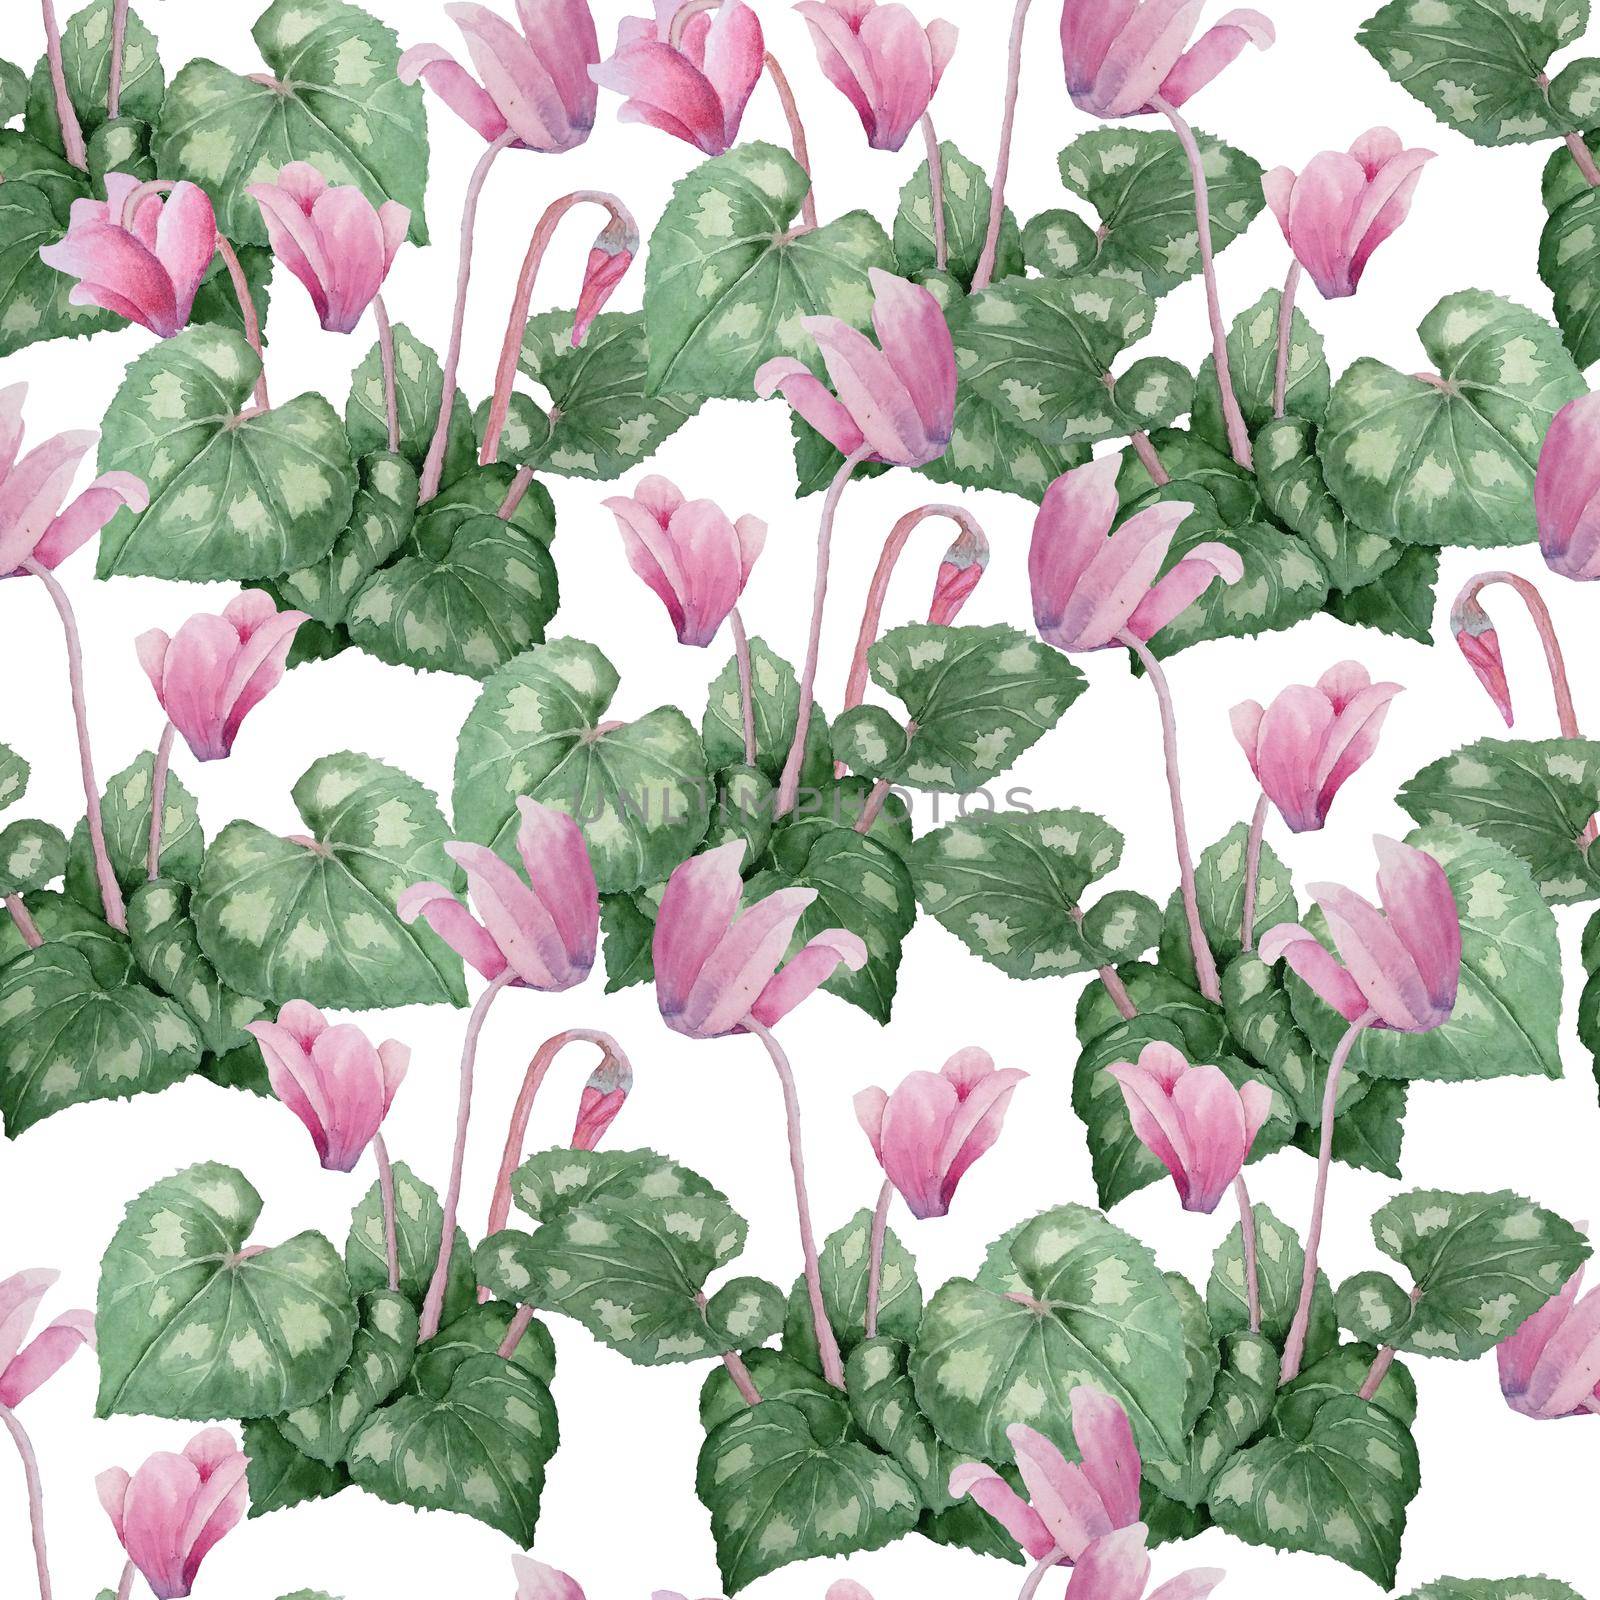 Watercolor hand drawn seamless pattern illustration of pink violet purple cyclamen wild flowers. Forest wood woodland nature plant, natural realistic design leaves petals. For wedding cards, invitation. by Lagmar